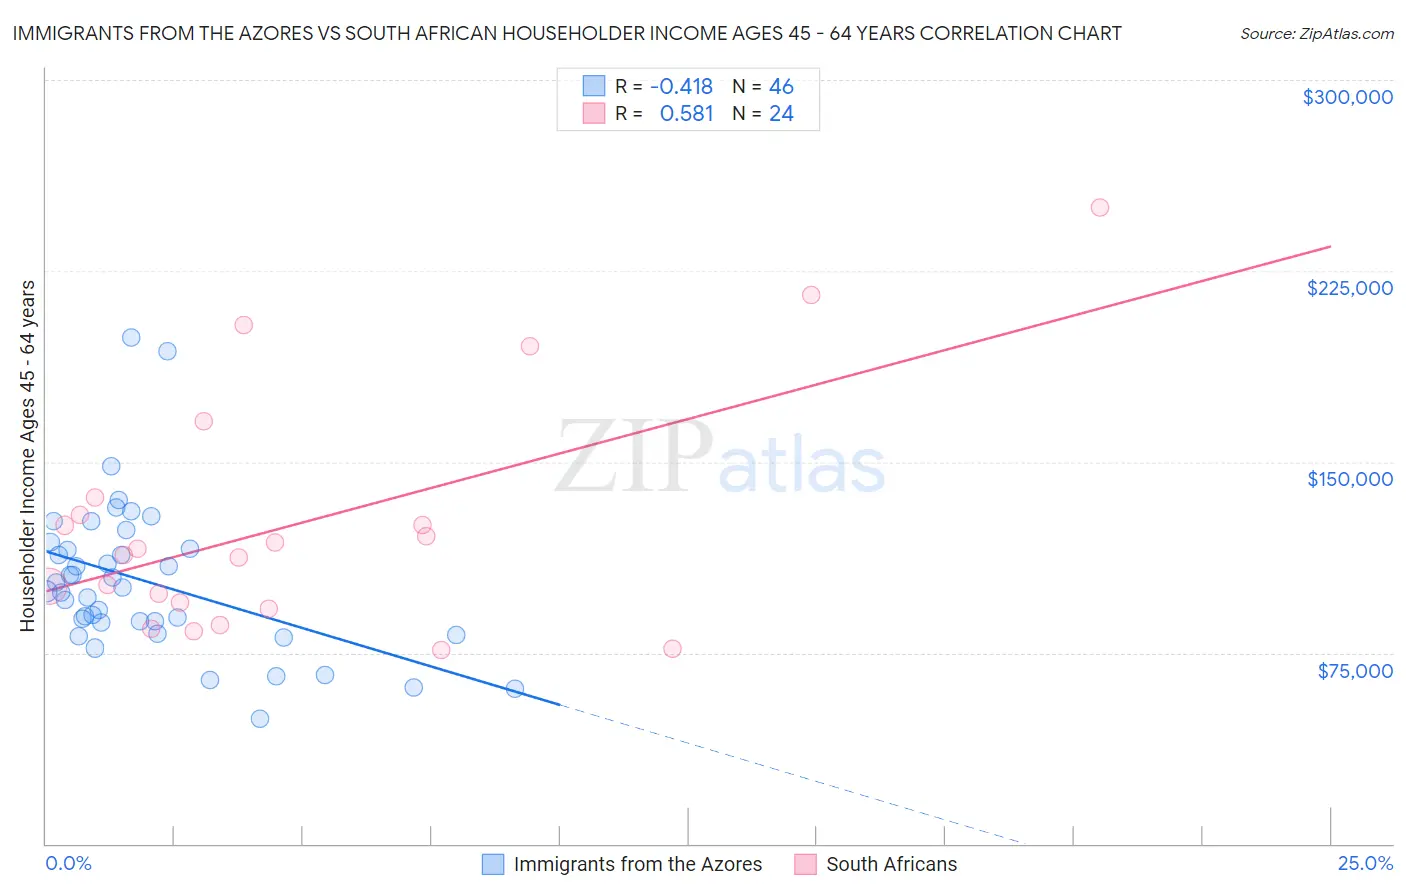 Immigrants from the Azores vs South African Householder Income Ages 45 - 64 years